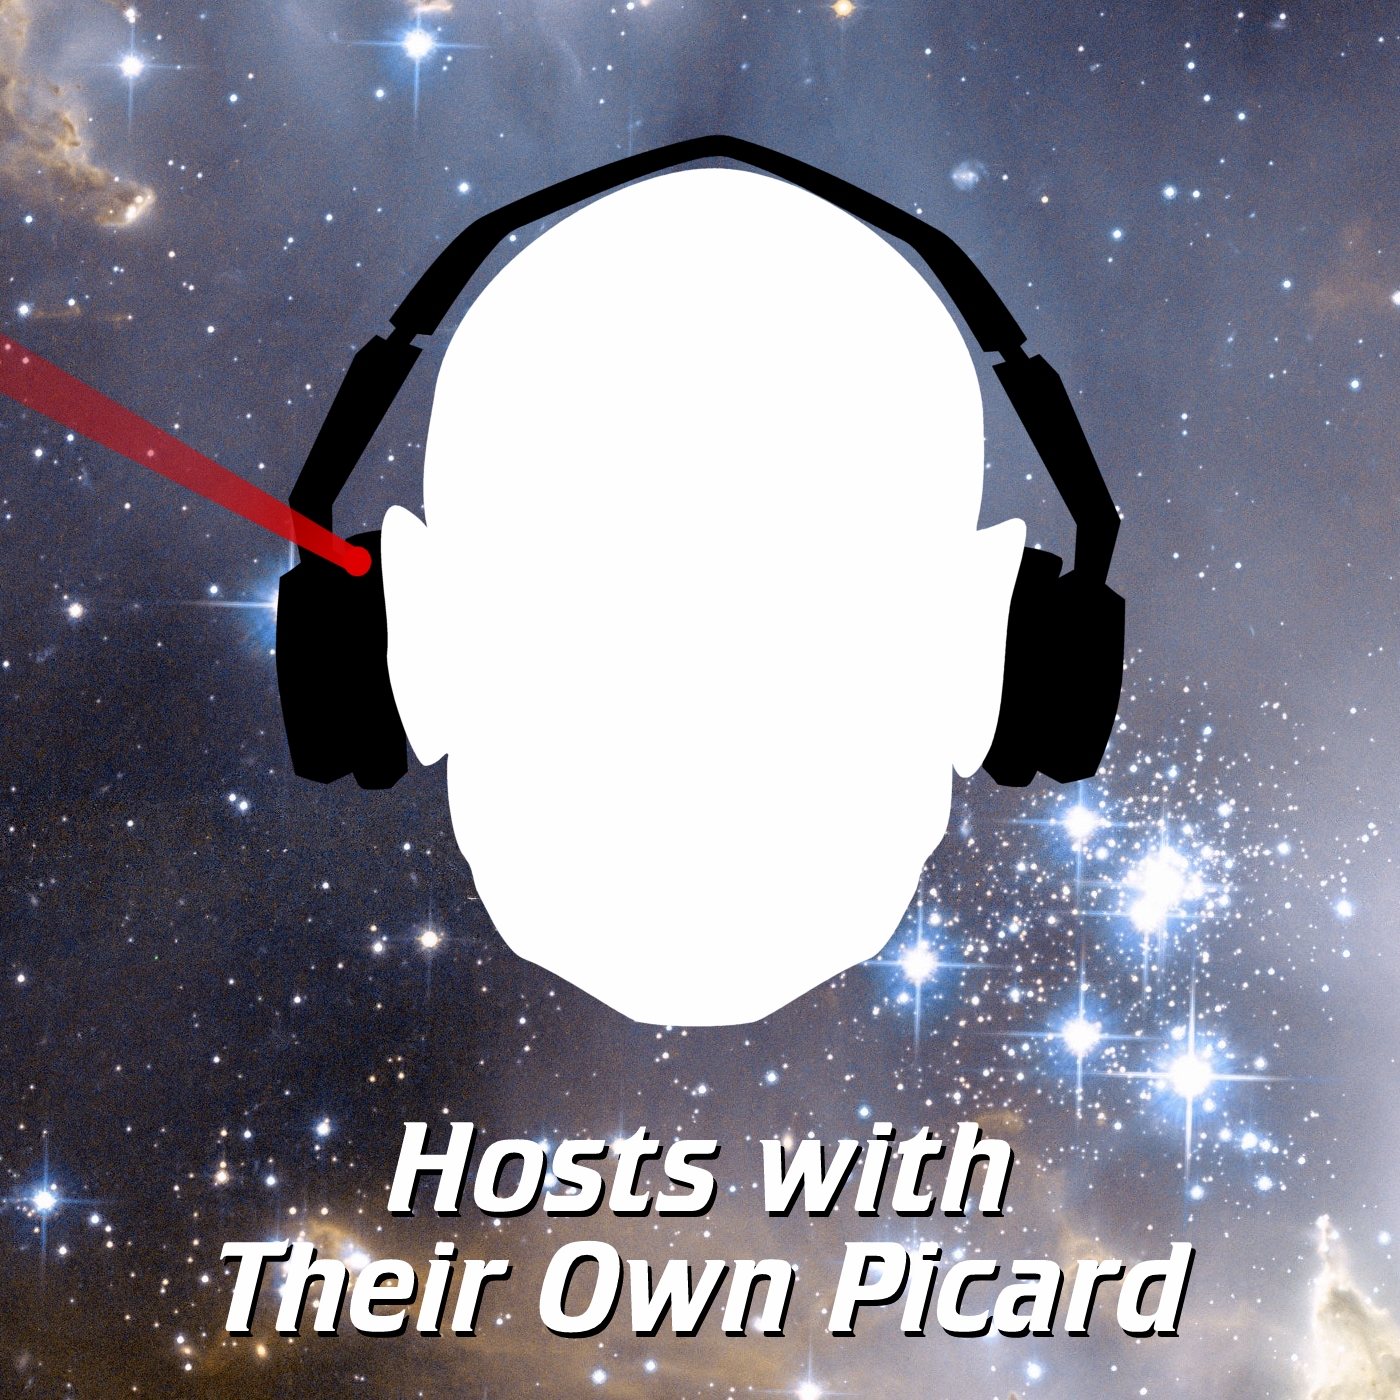 Hosts with Their Own Picard Podcast Episode 6 – S1E3 – The End is the Beginning (aka Hugh’s the Boss)